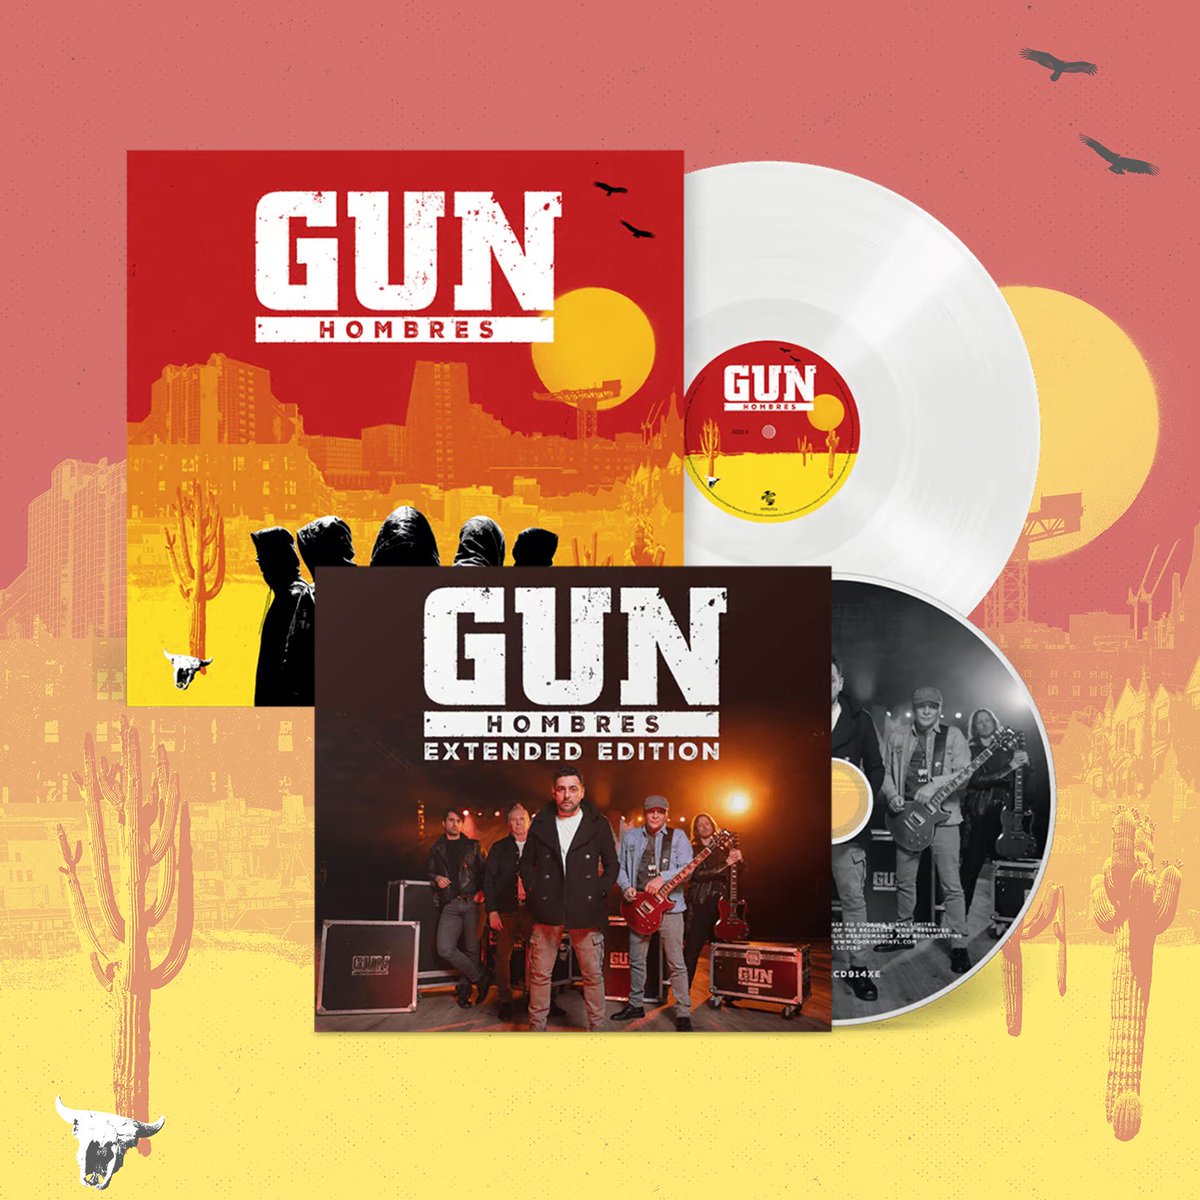 There are less than 100 copies of the Extended Edition CD version of Hombres left!! This version has several live versions of tracks from the album and can only be found on our online store! If you haven't ordered yours yet don't wait any longer: gun.tmstor.es